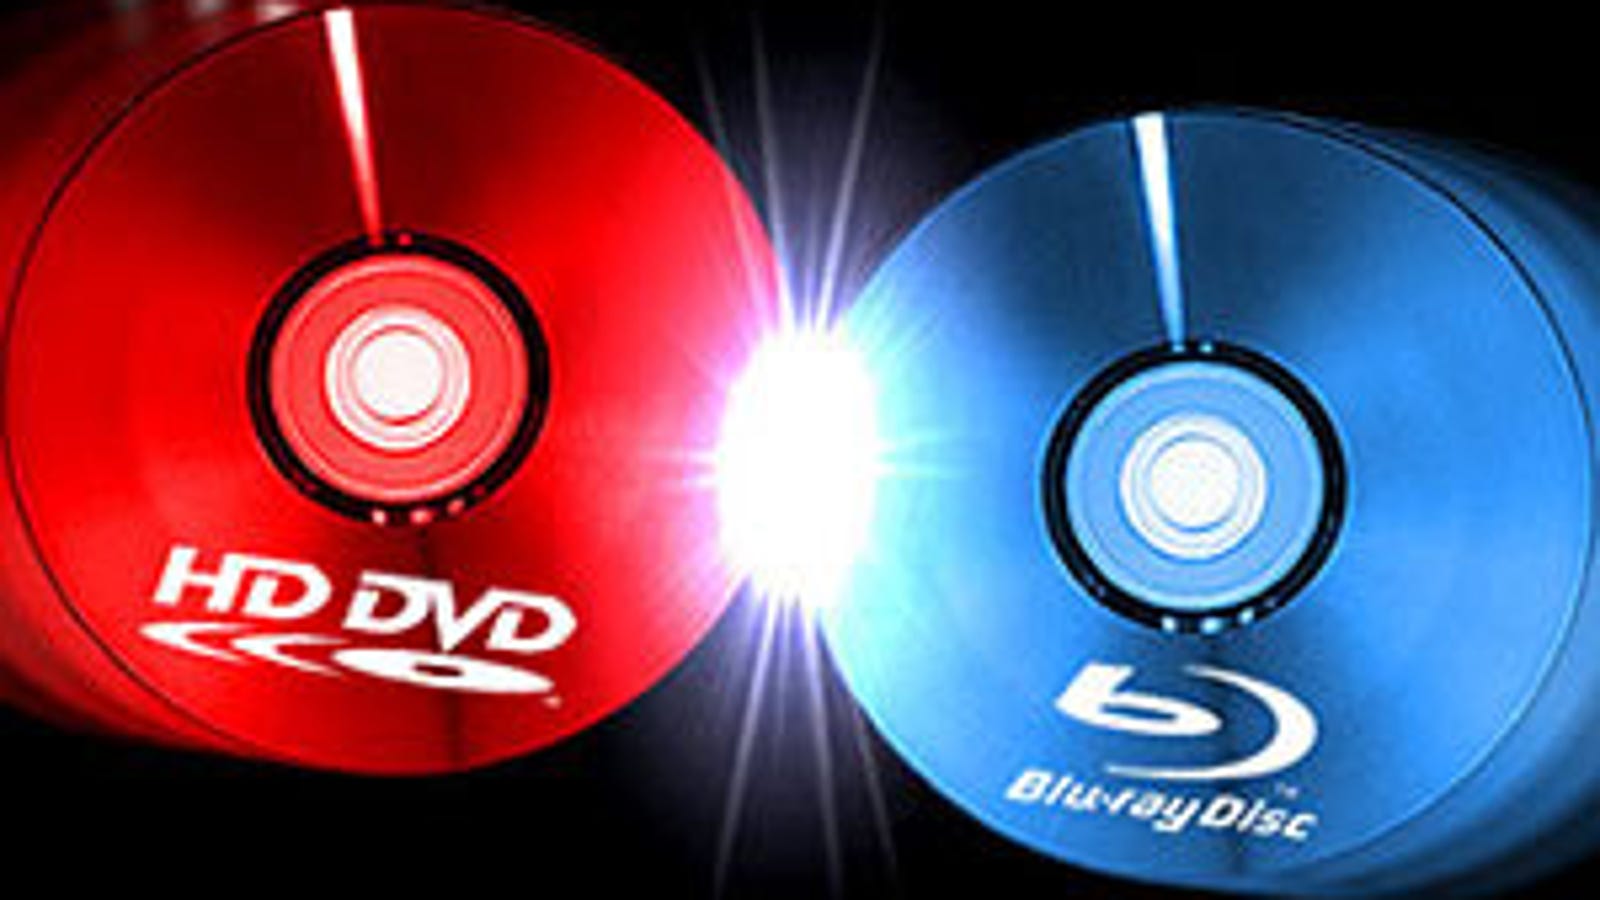 HD DVD and Blu-ray Compared Using Identical Source Material